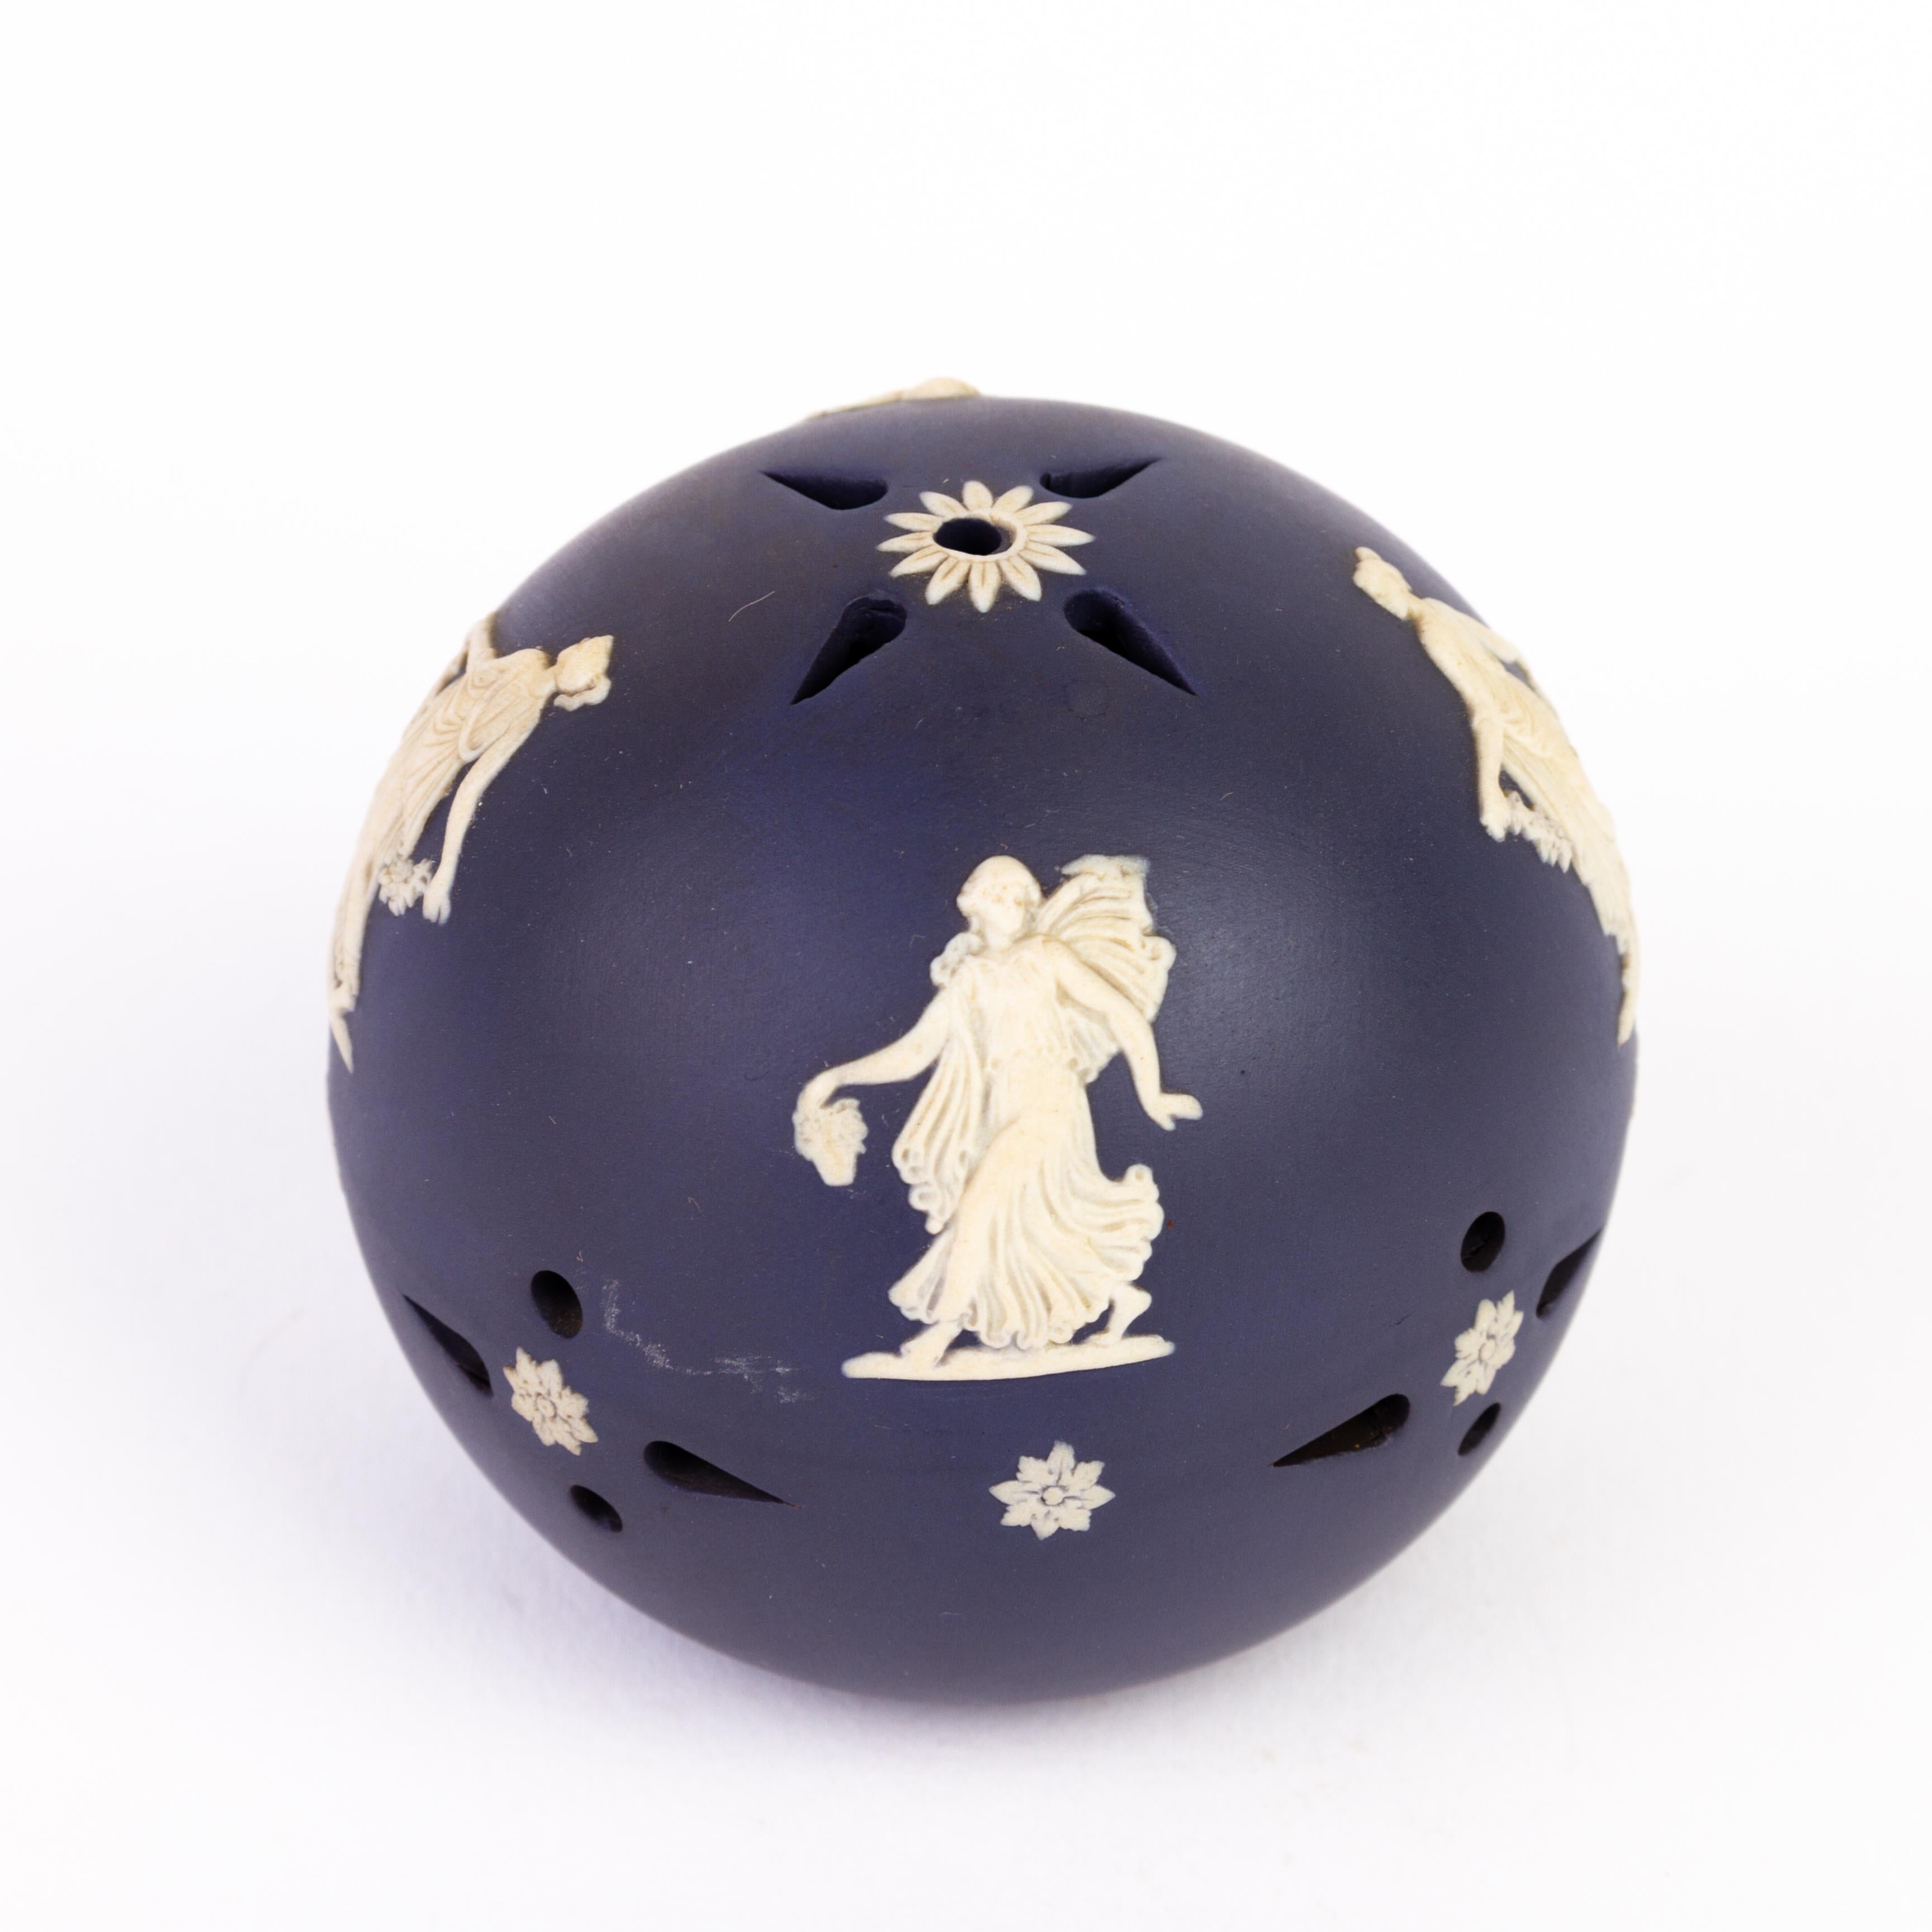 From a private collection.
Free international shipping.
Wedgwood Jasperware Portland Blue Pomander Potpourri